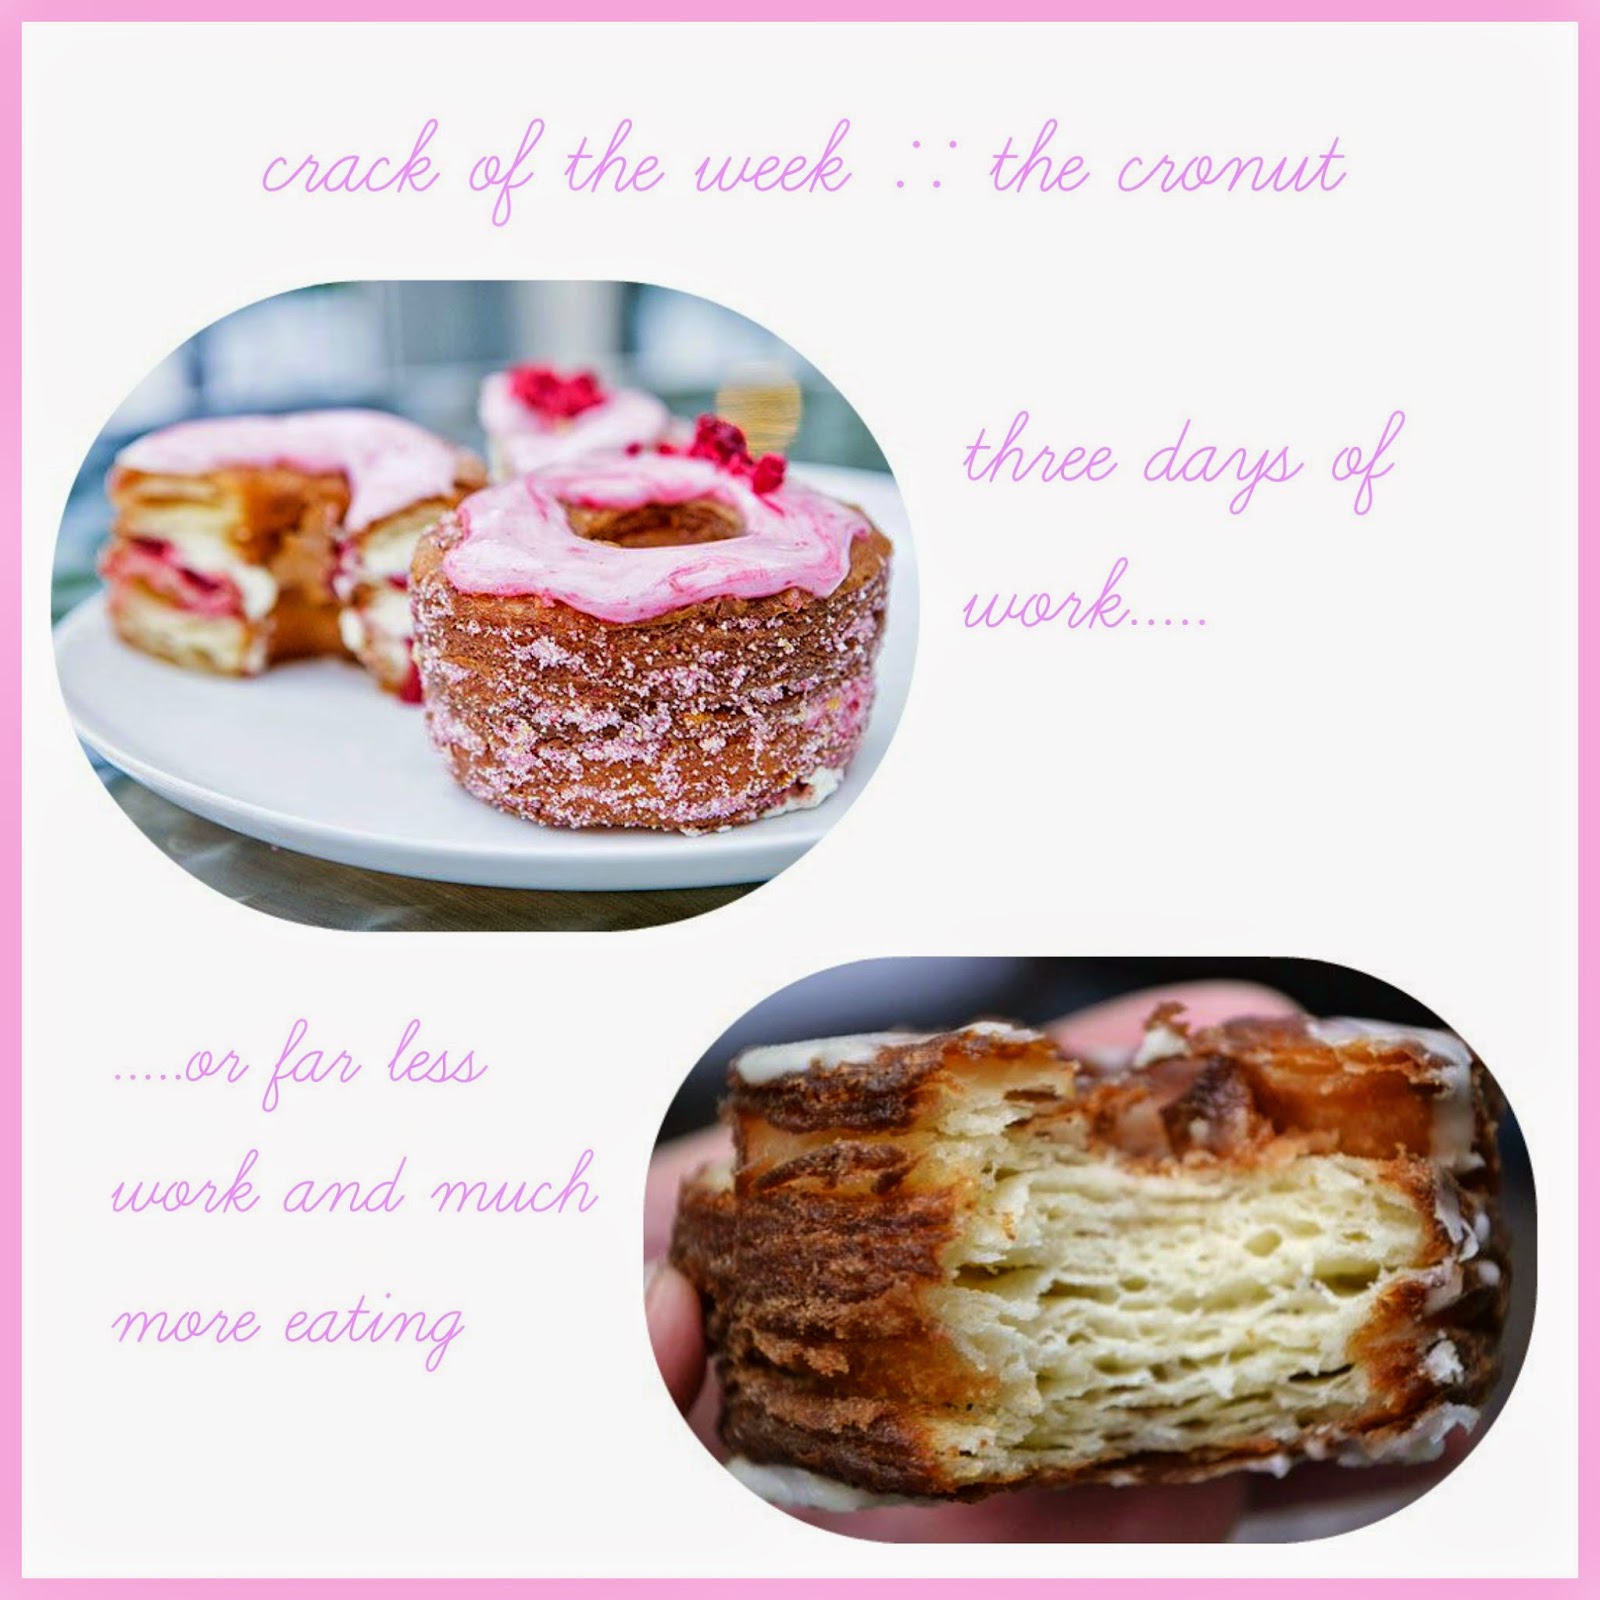 crack of the week :: the cronut